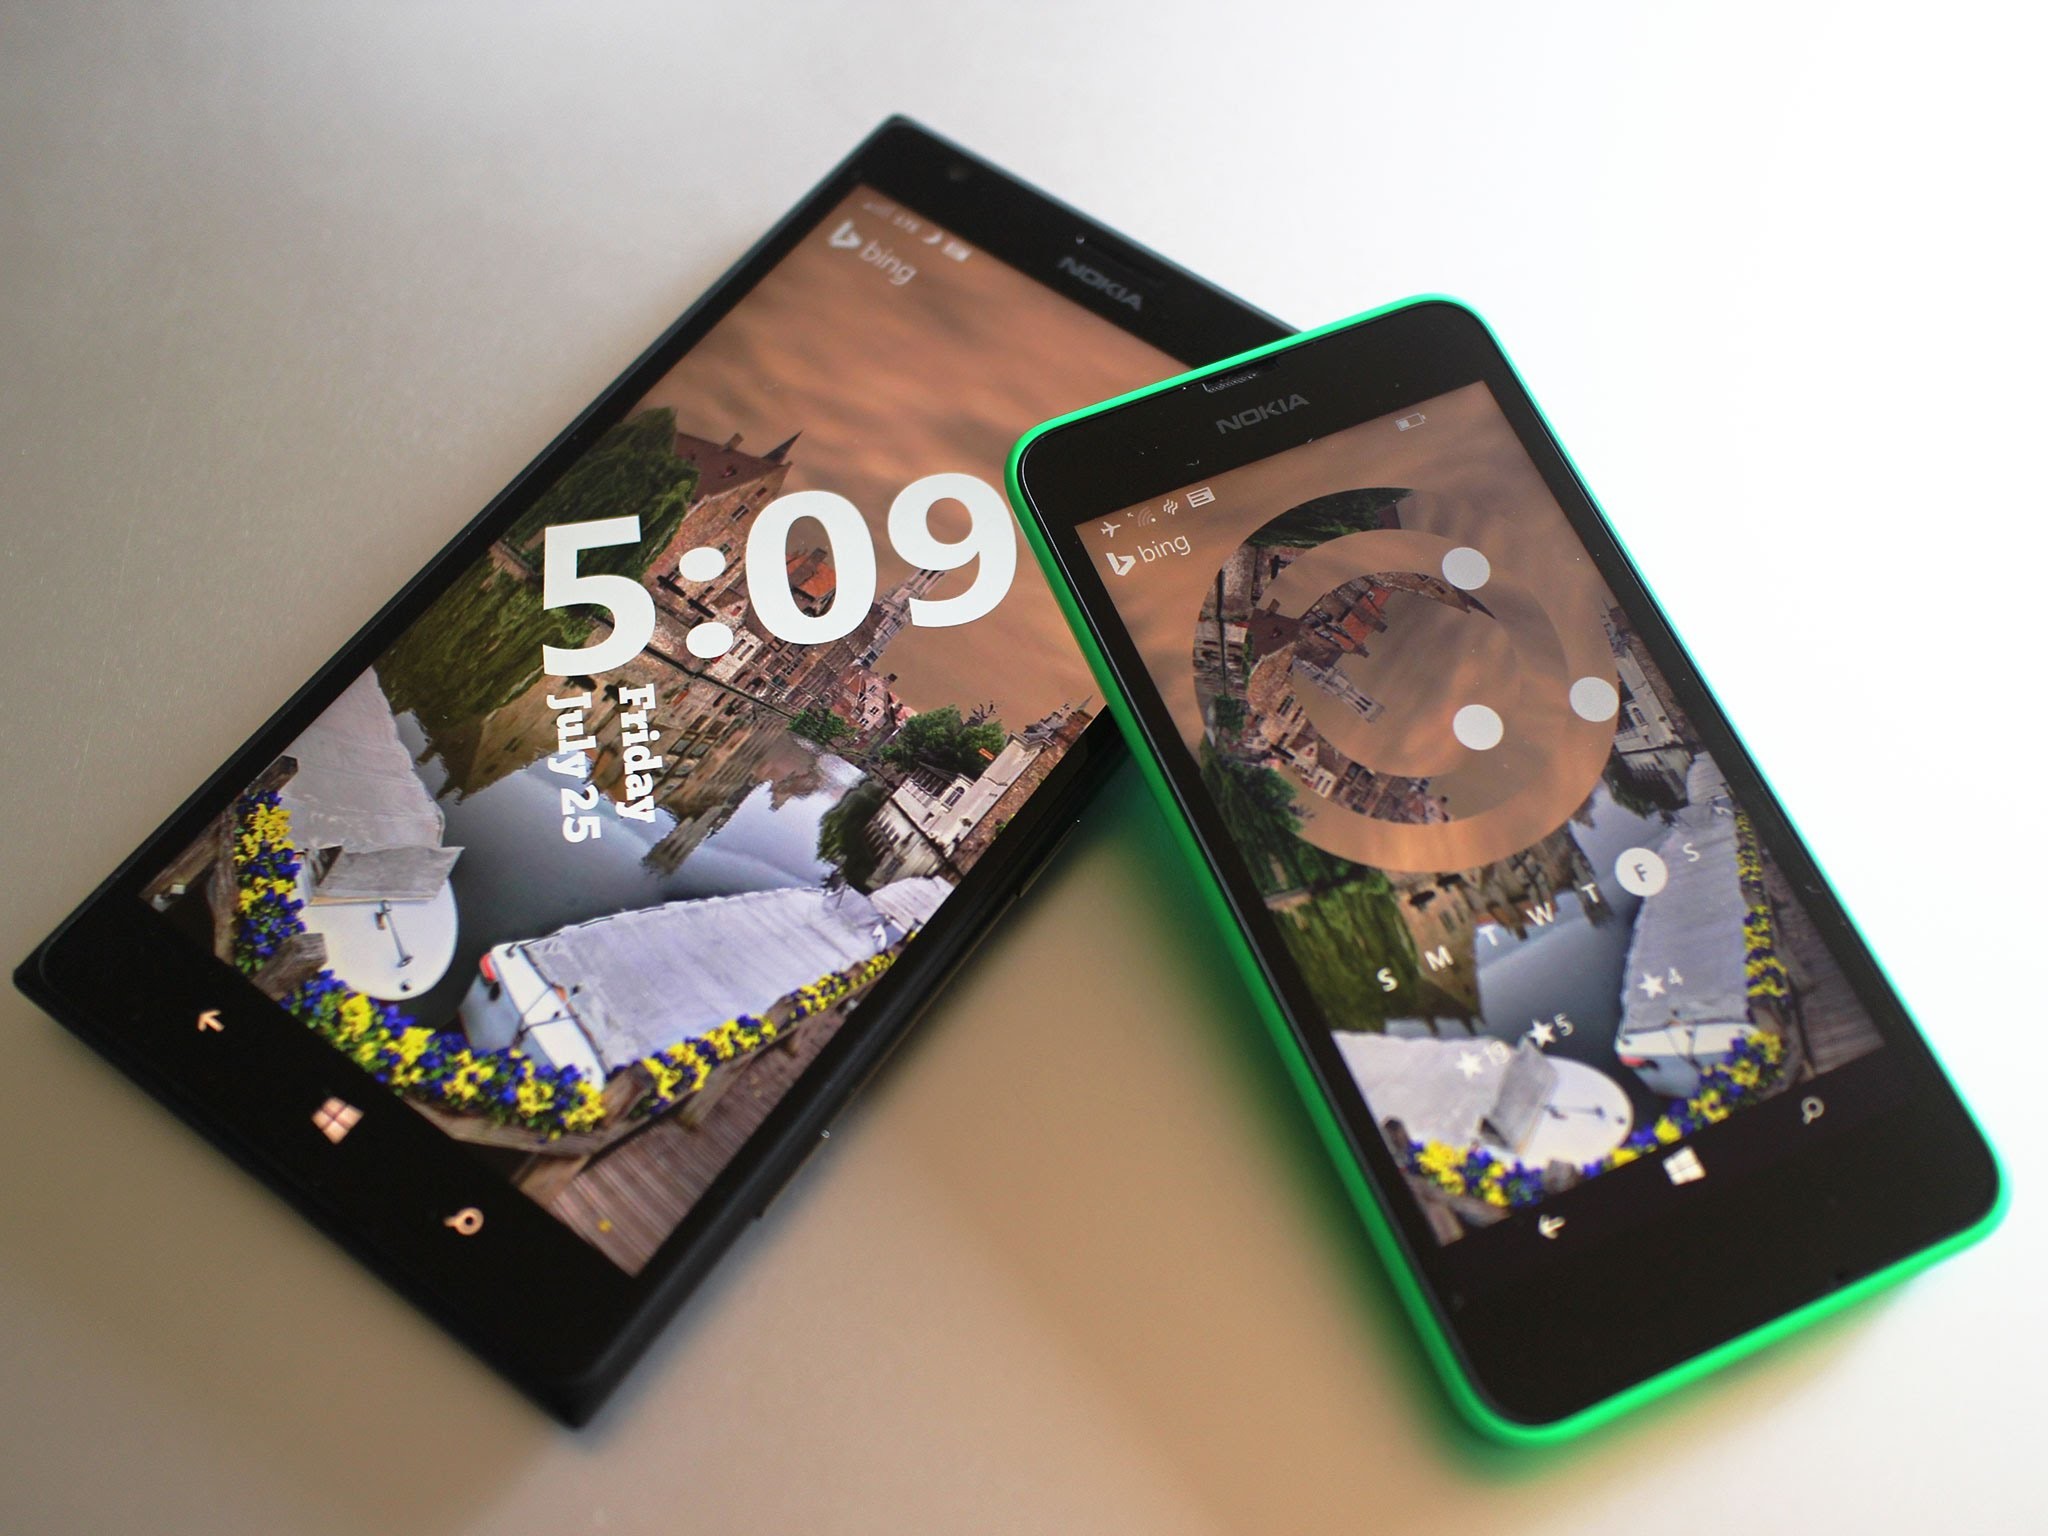 2048x1536 Hands-on with the new Live Lock Screen app for Windows Phone 8.1 - YouTube